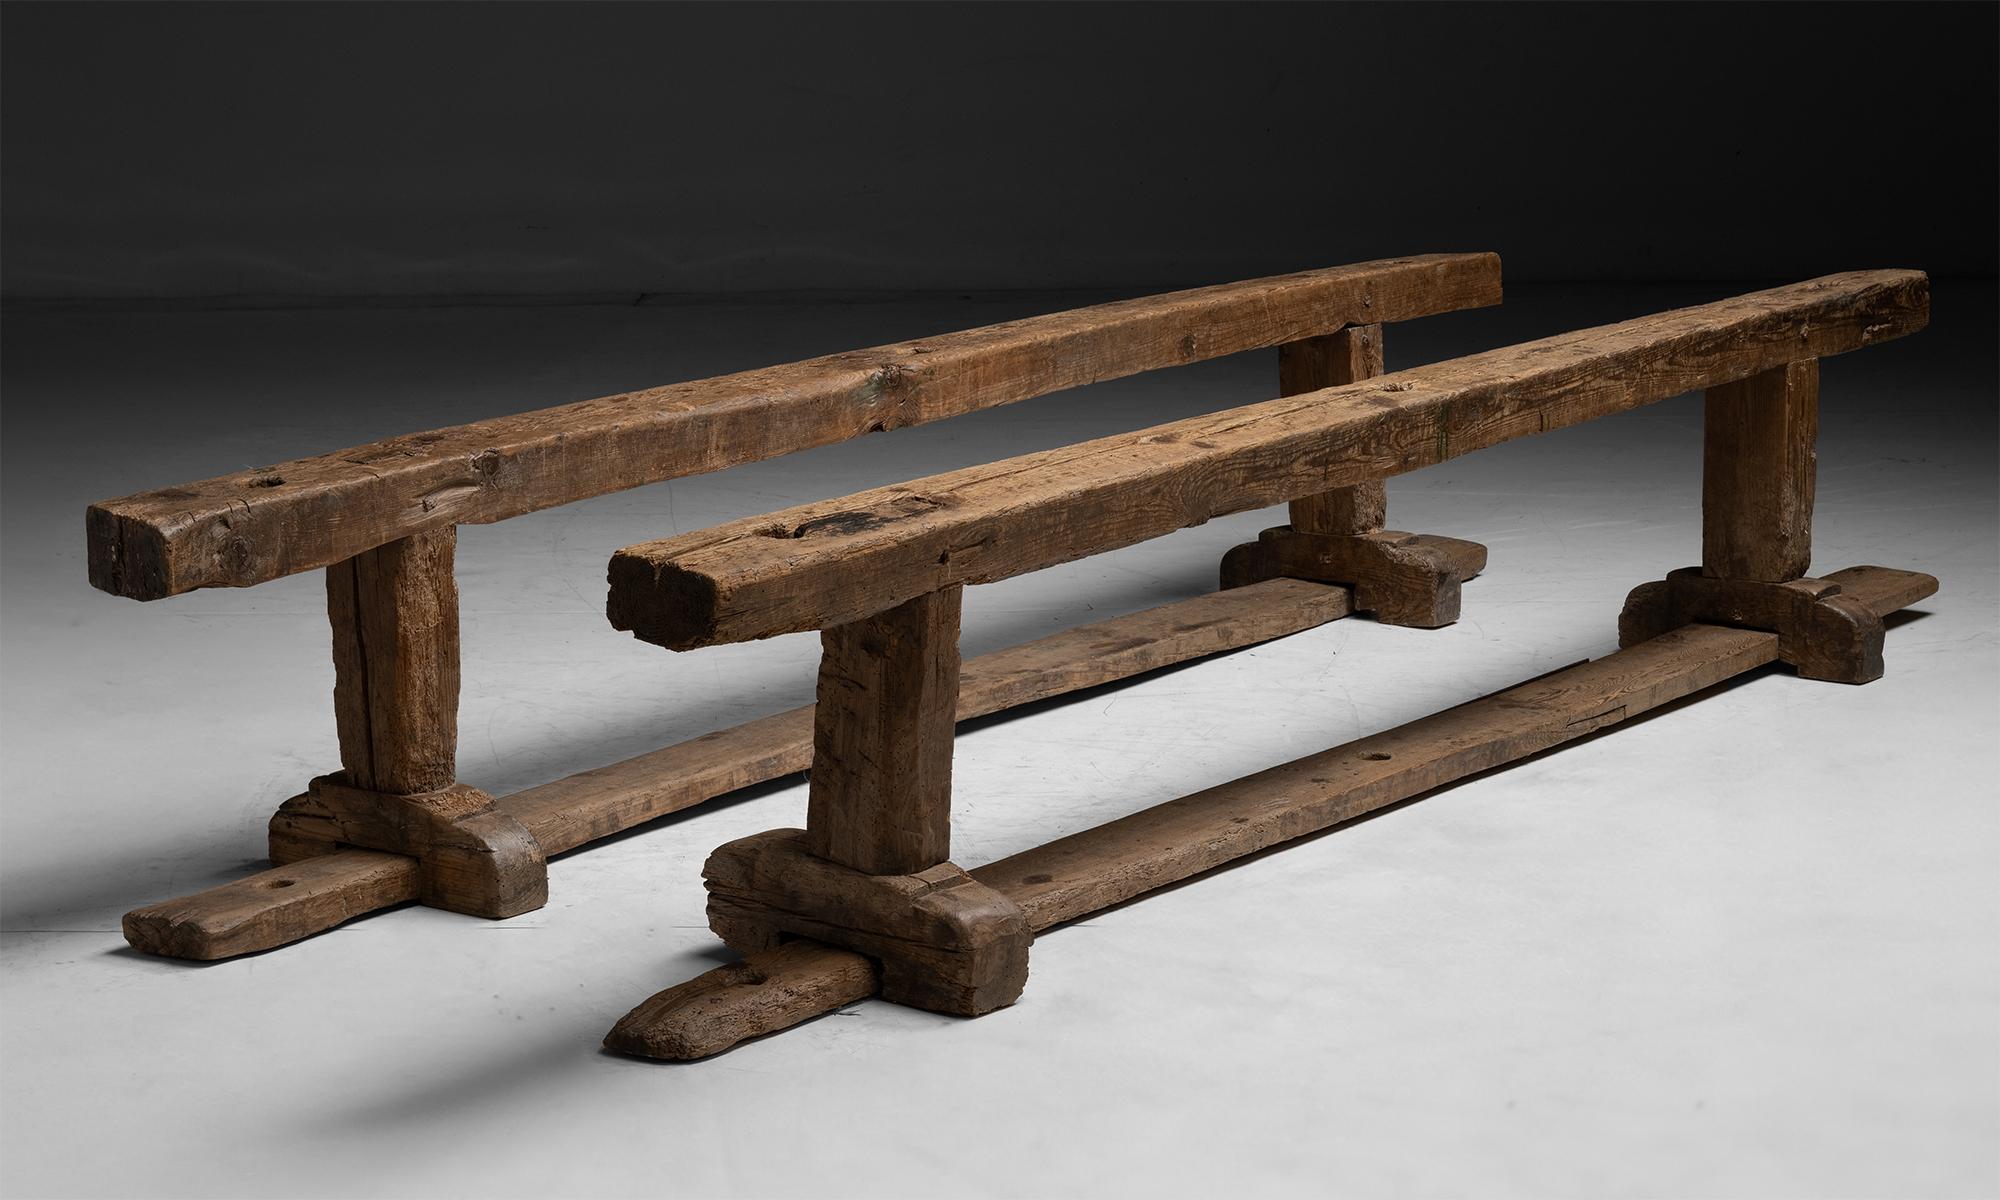 Monastery Benches
France circa 1880
Primitive Trestle benches with stretchers and weathered surface.
111.25